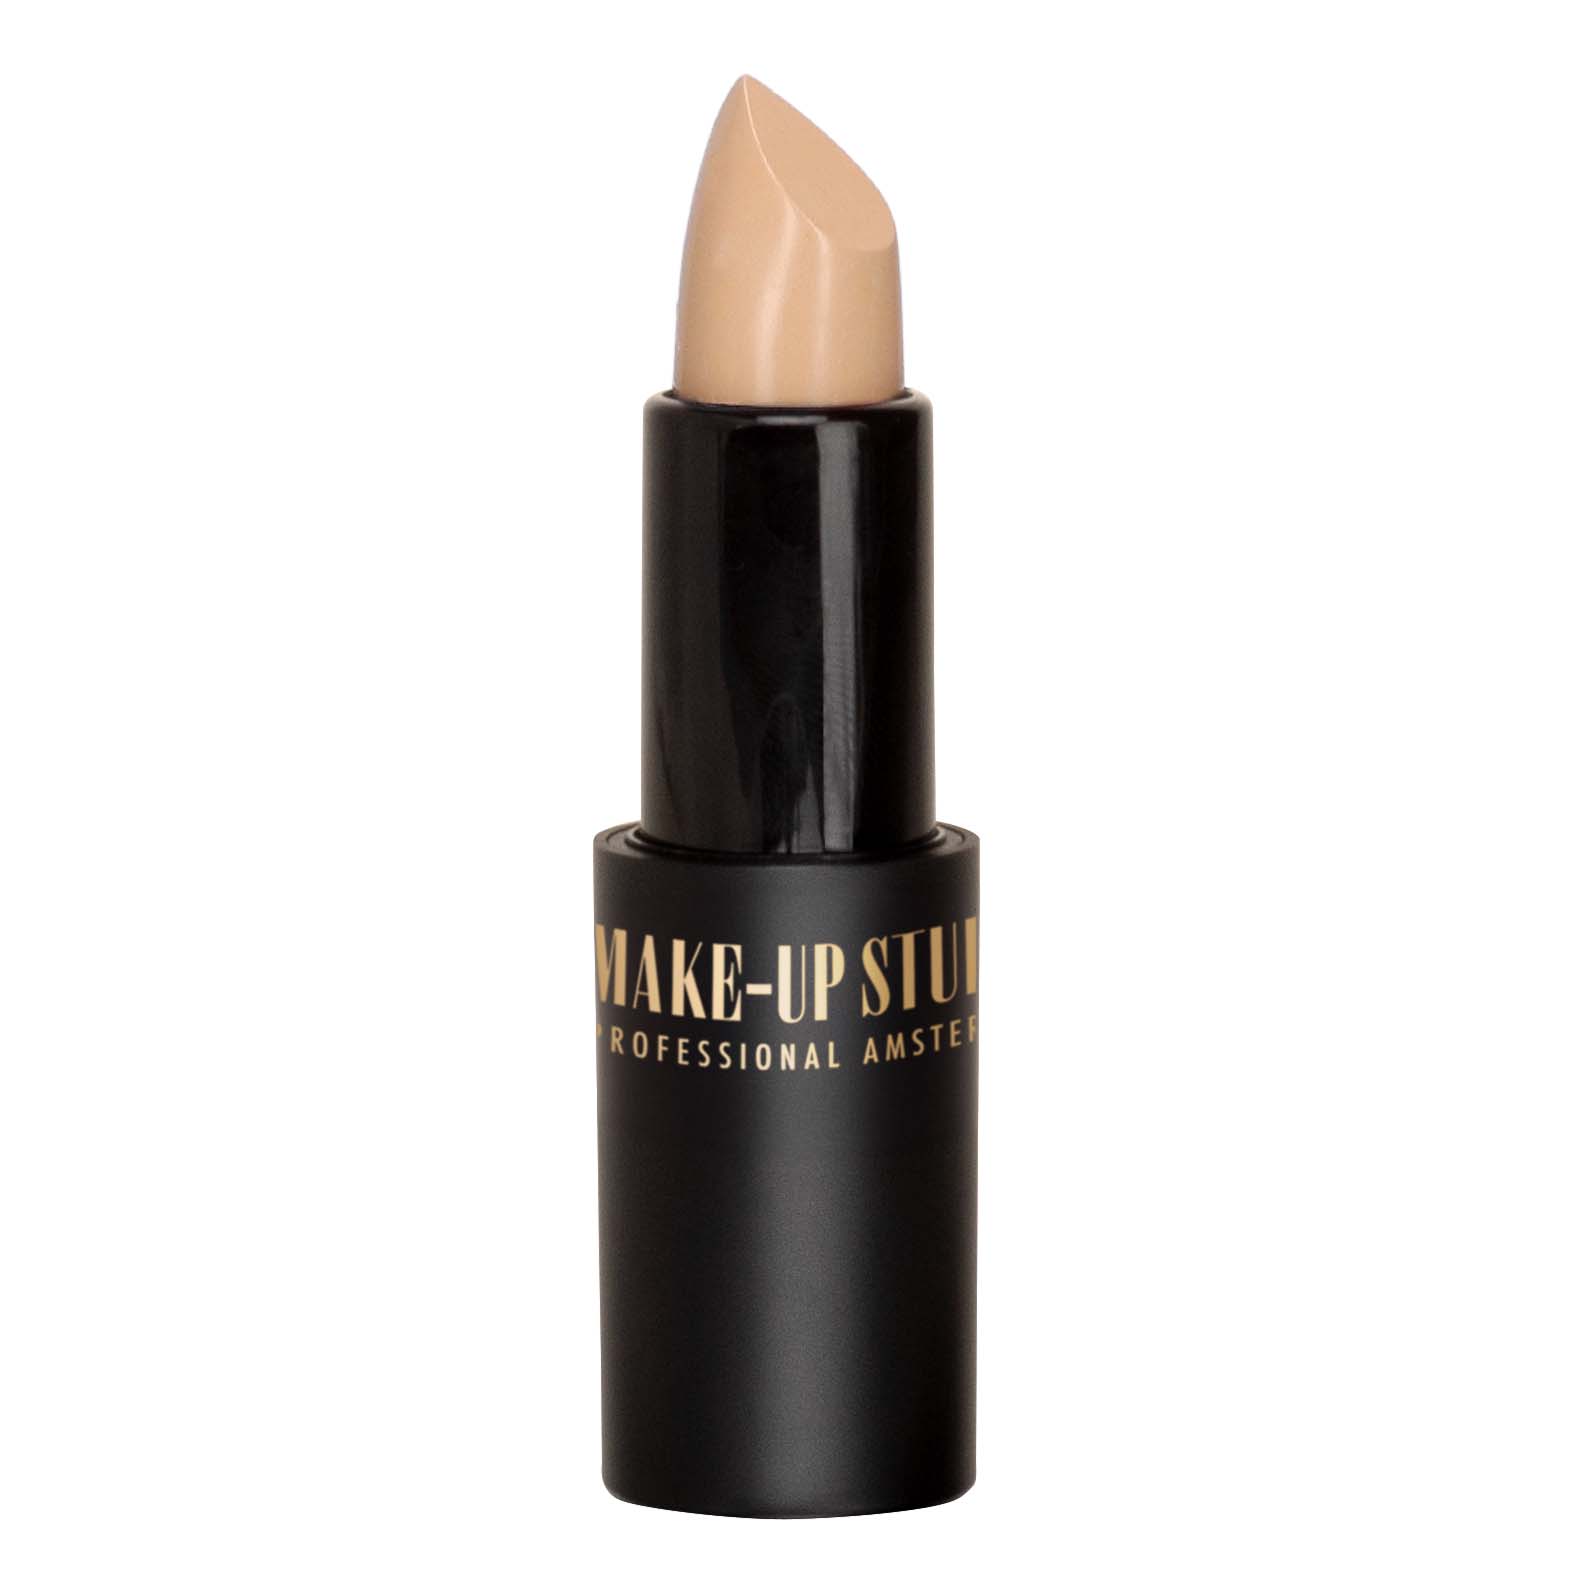 Shop all lip products from Make-up Studio online! | Make-up Studio Amsterdam